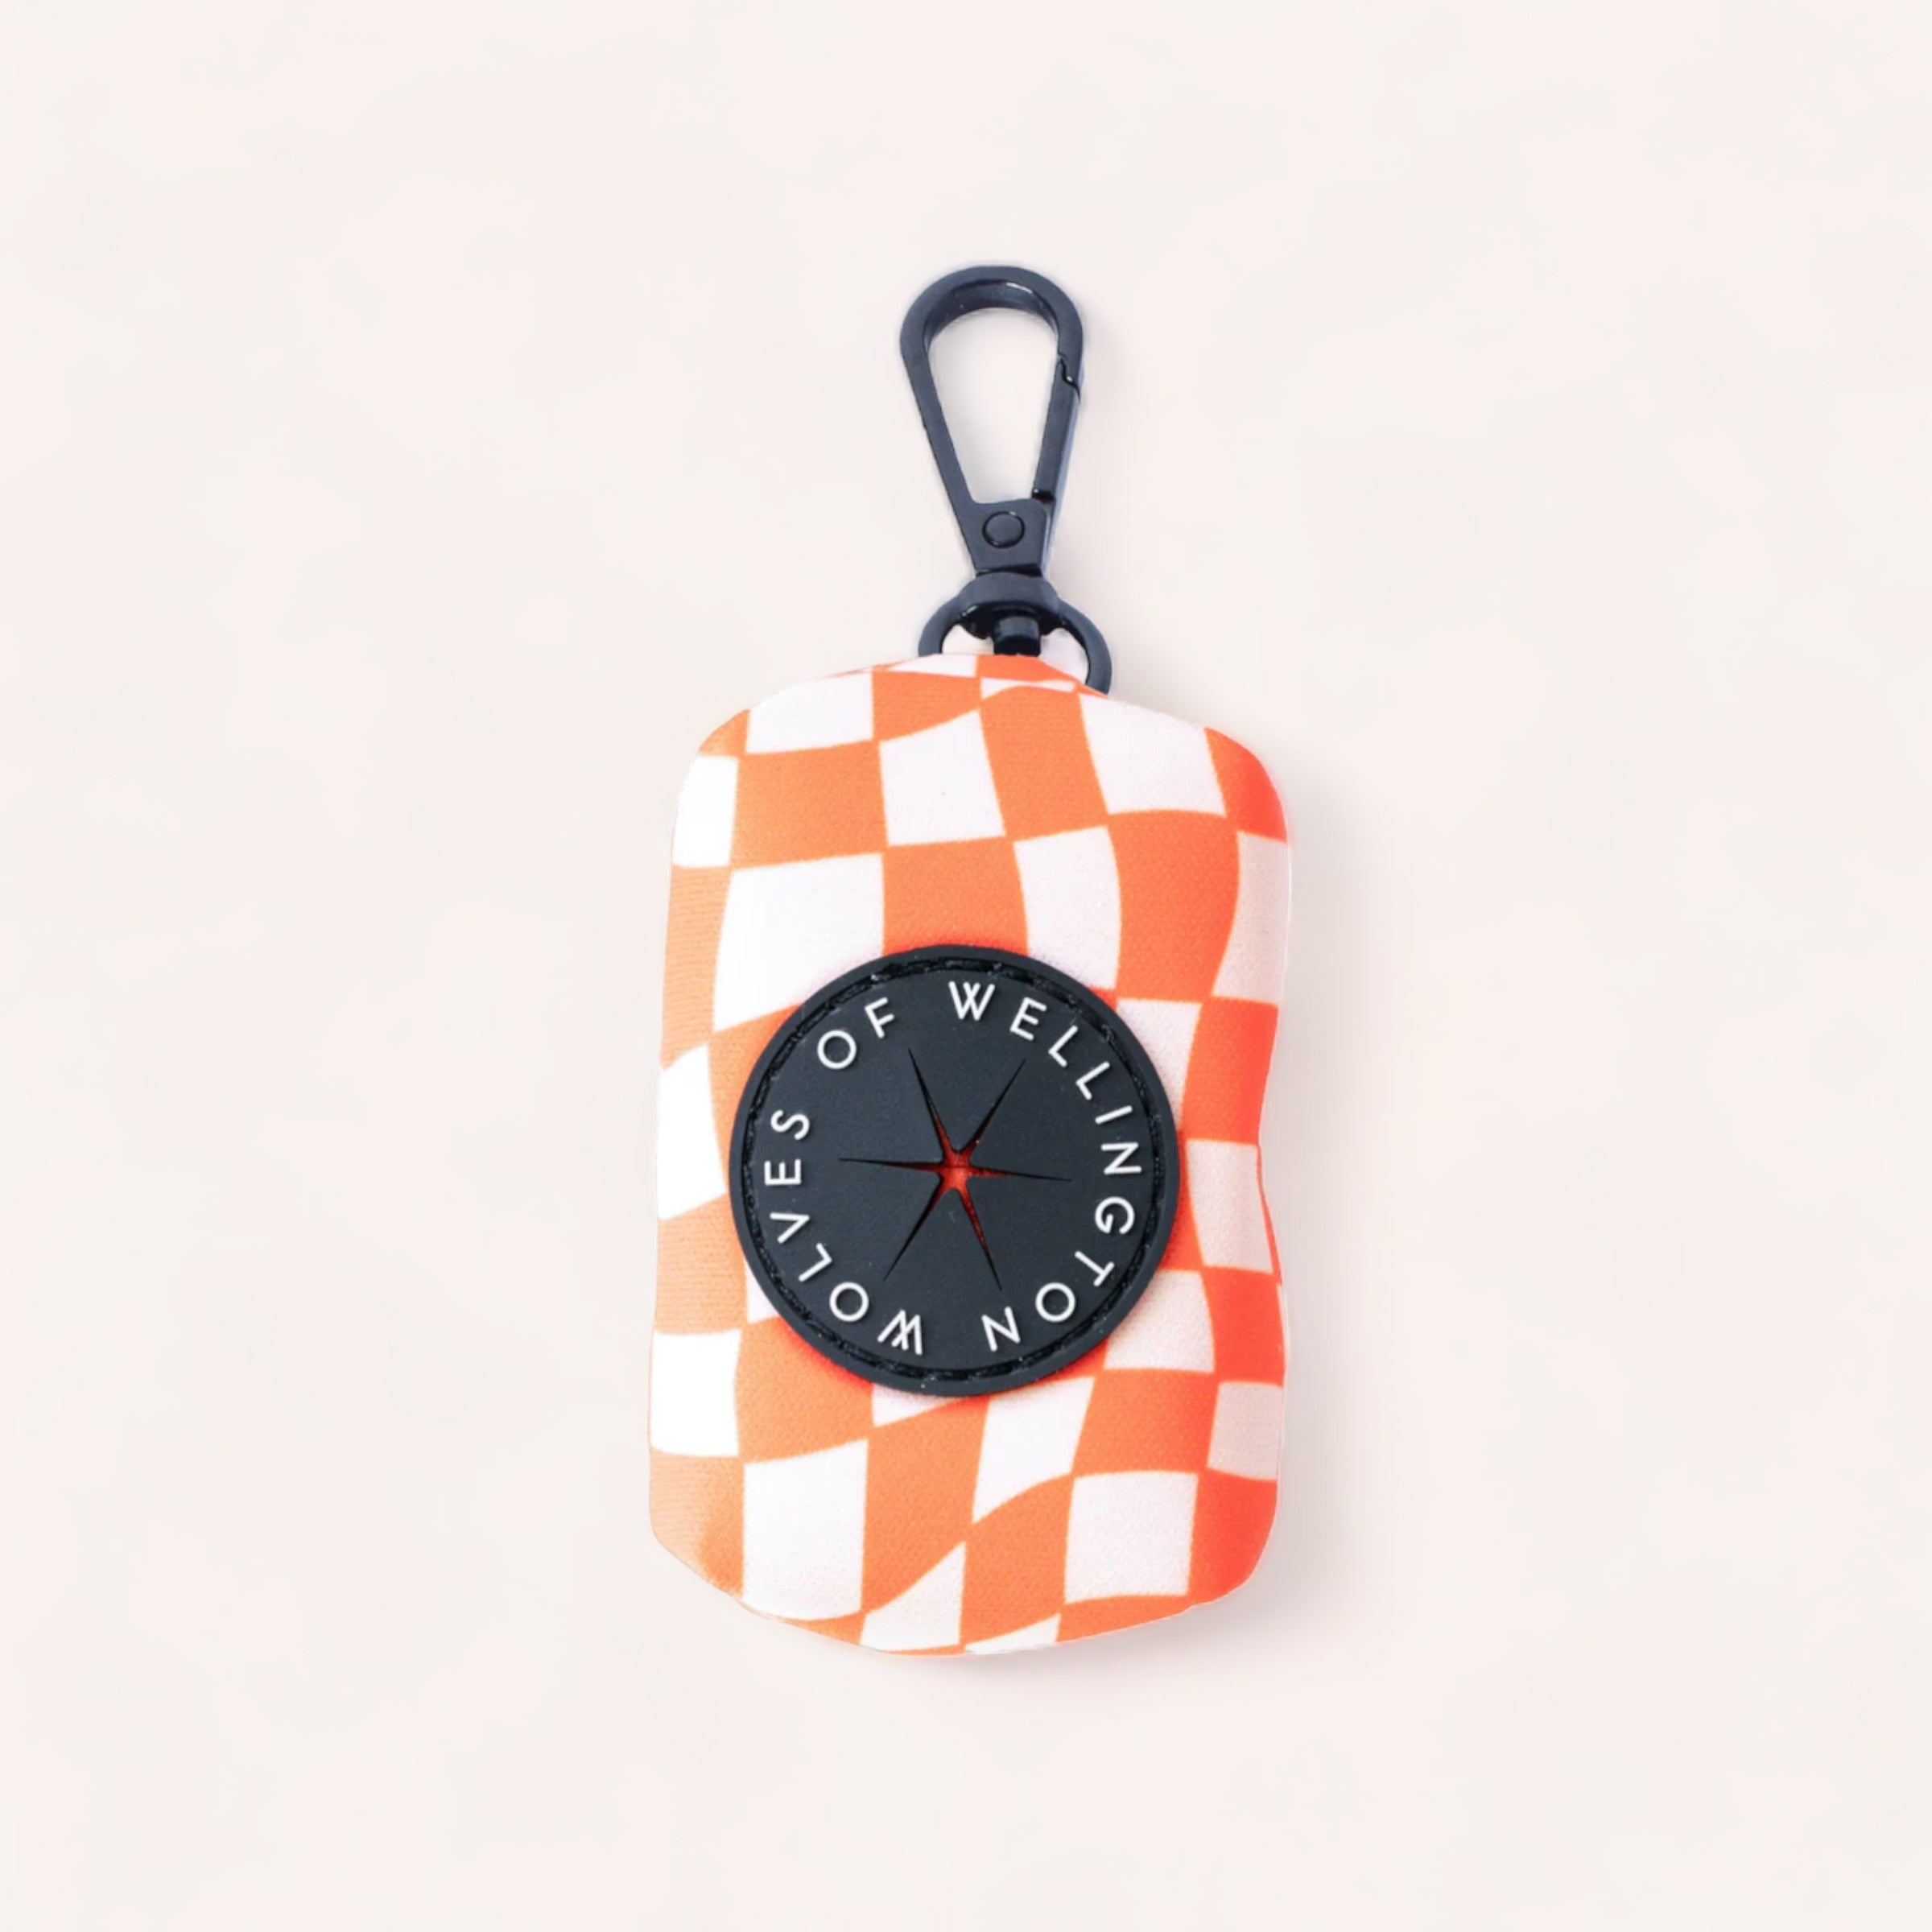 A portable, checkered orange and white patterned Benji Poop Pouch by Wolves of Wellington with a black carabiner clip and a logo stating "voices of wellington" against a beige background.